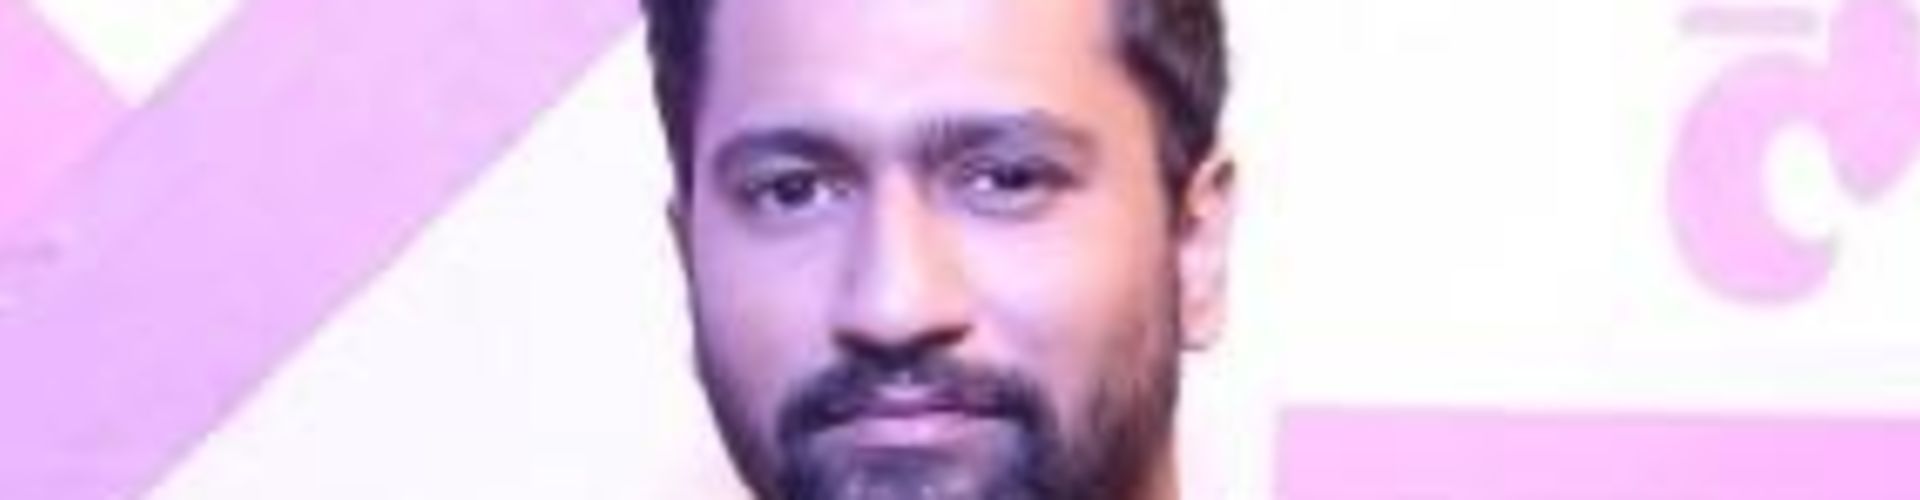 Be Beautiful From Inside, Outside Beauty Is Easy Says Vicky Kaushal